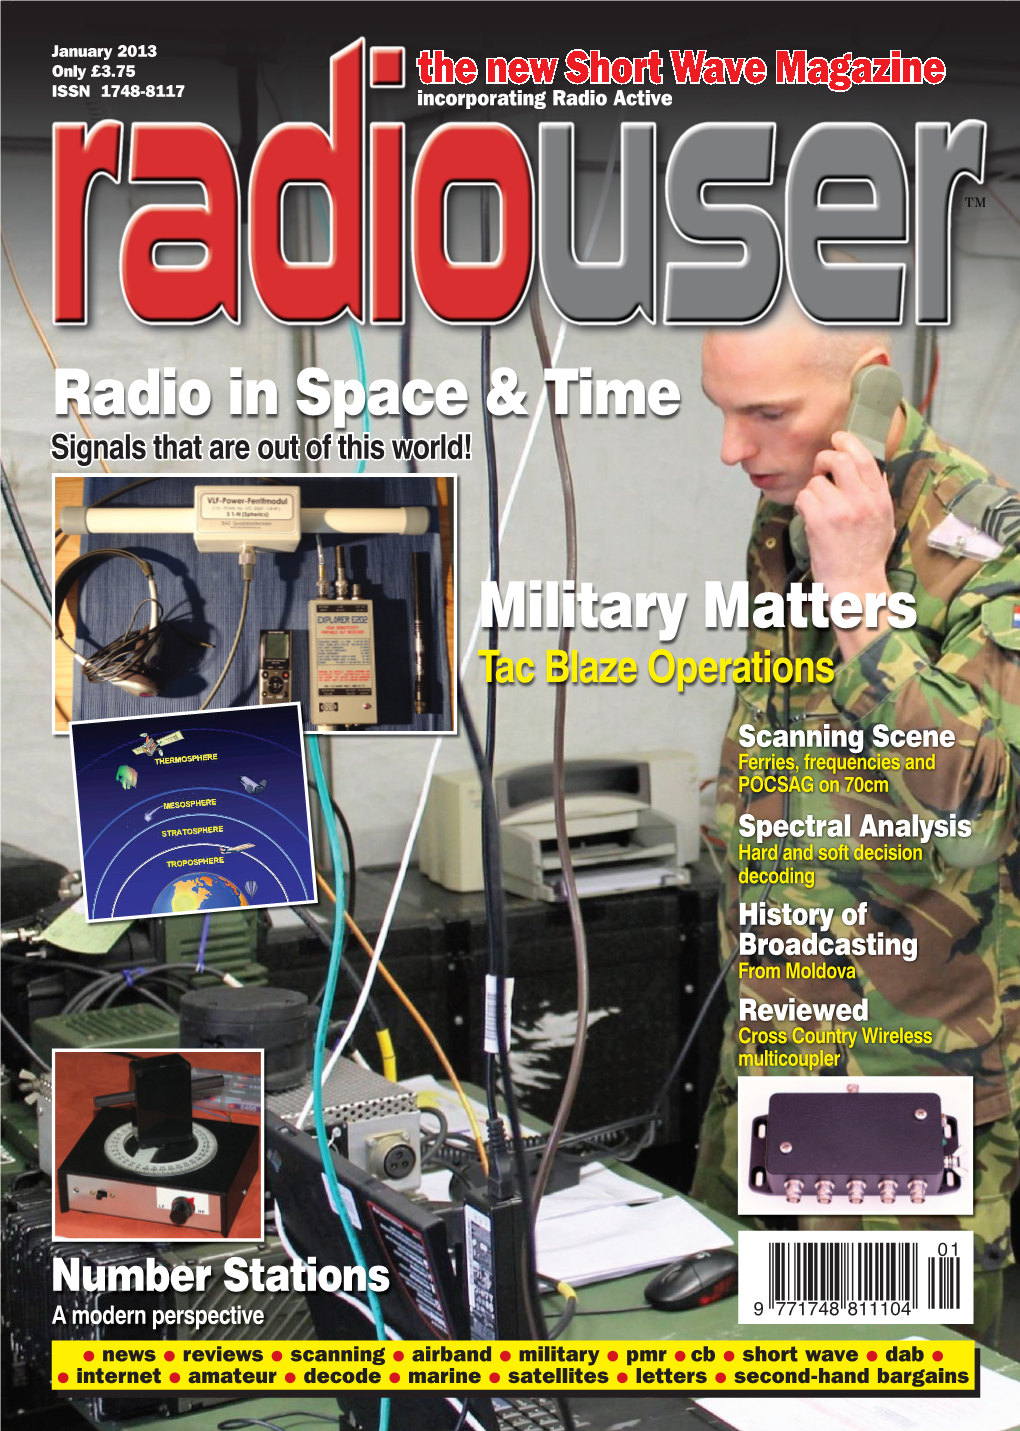 Military Matters Radio in Space & Time